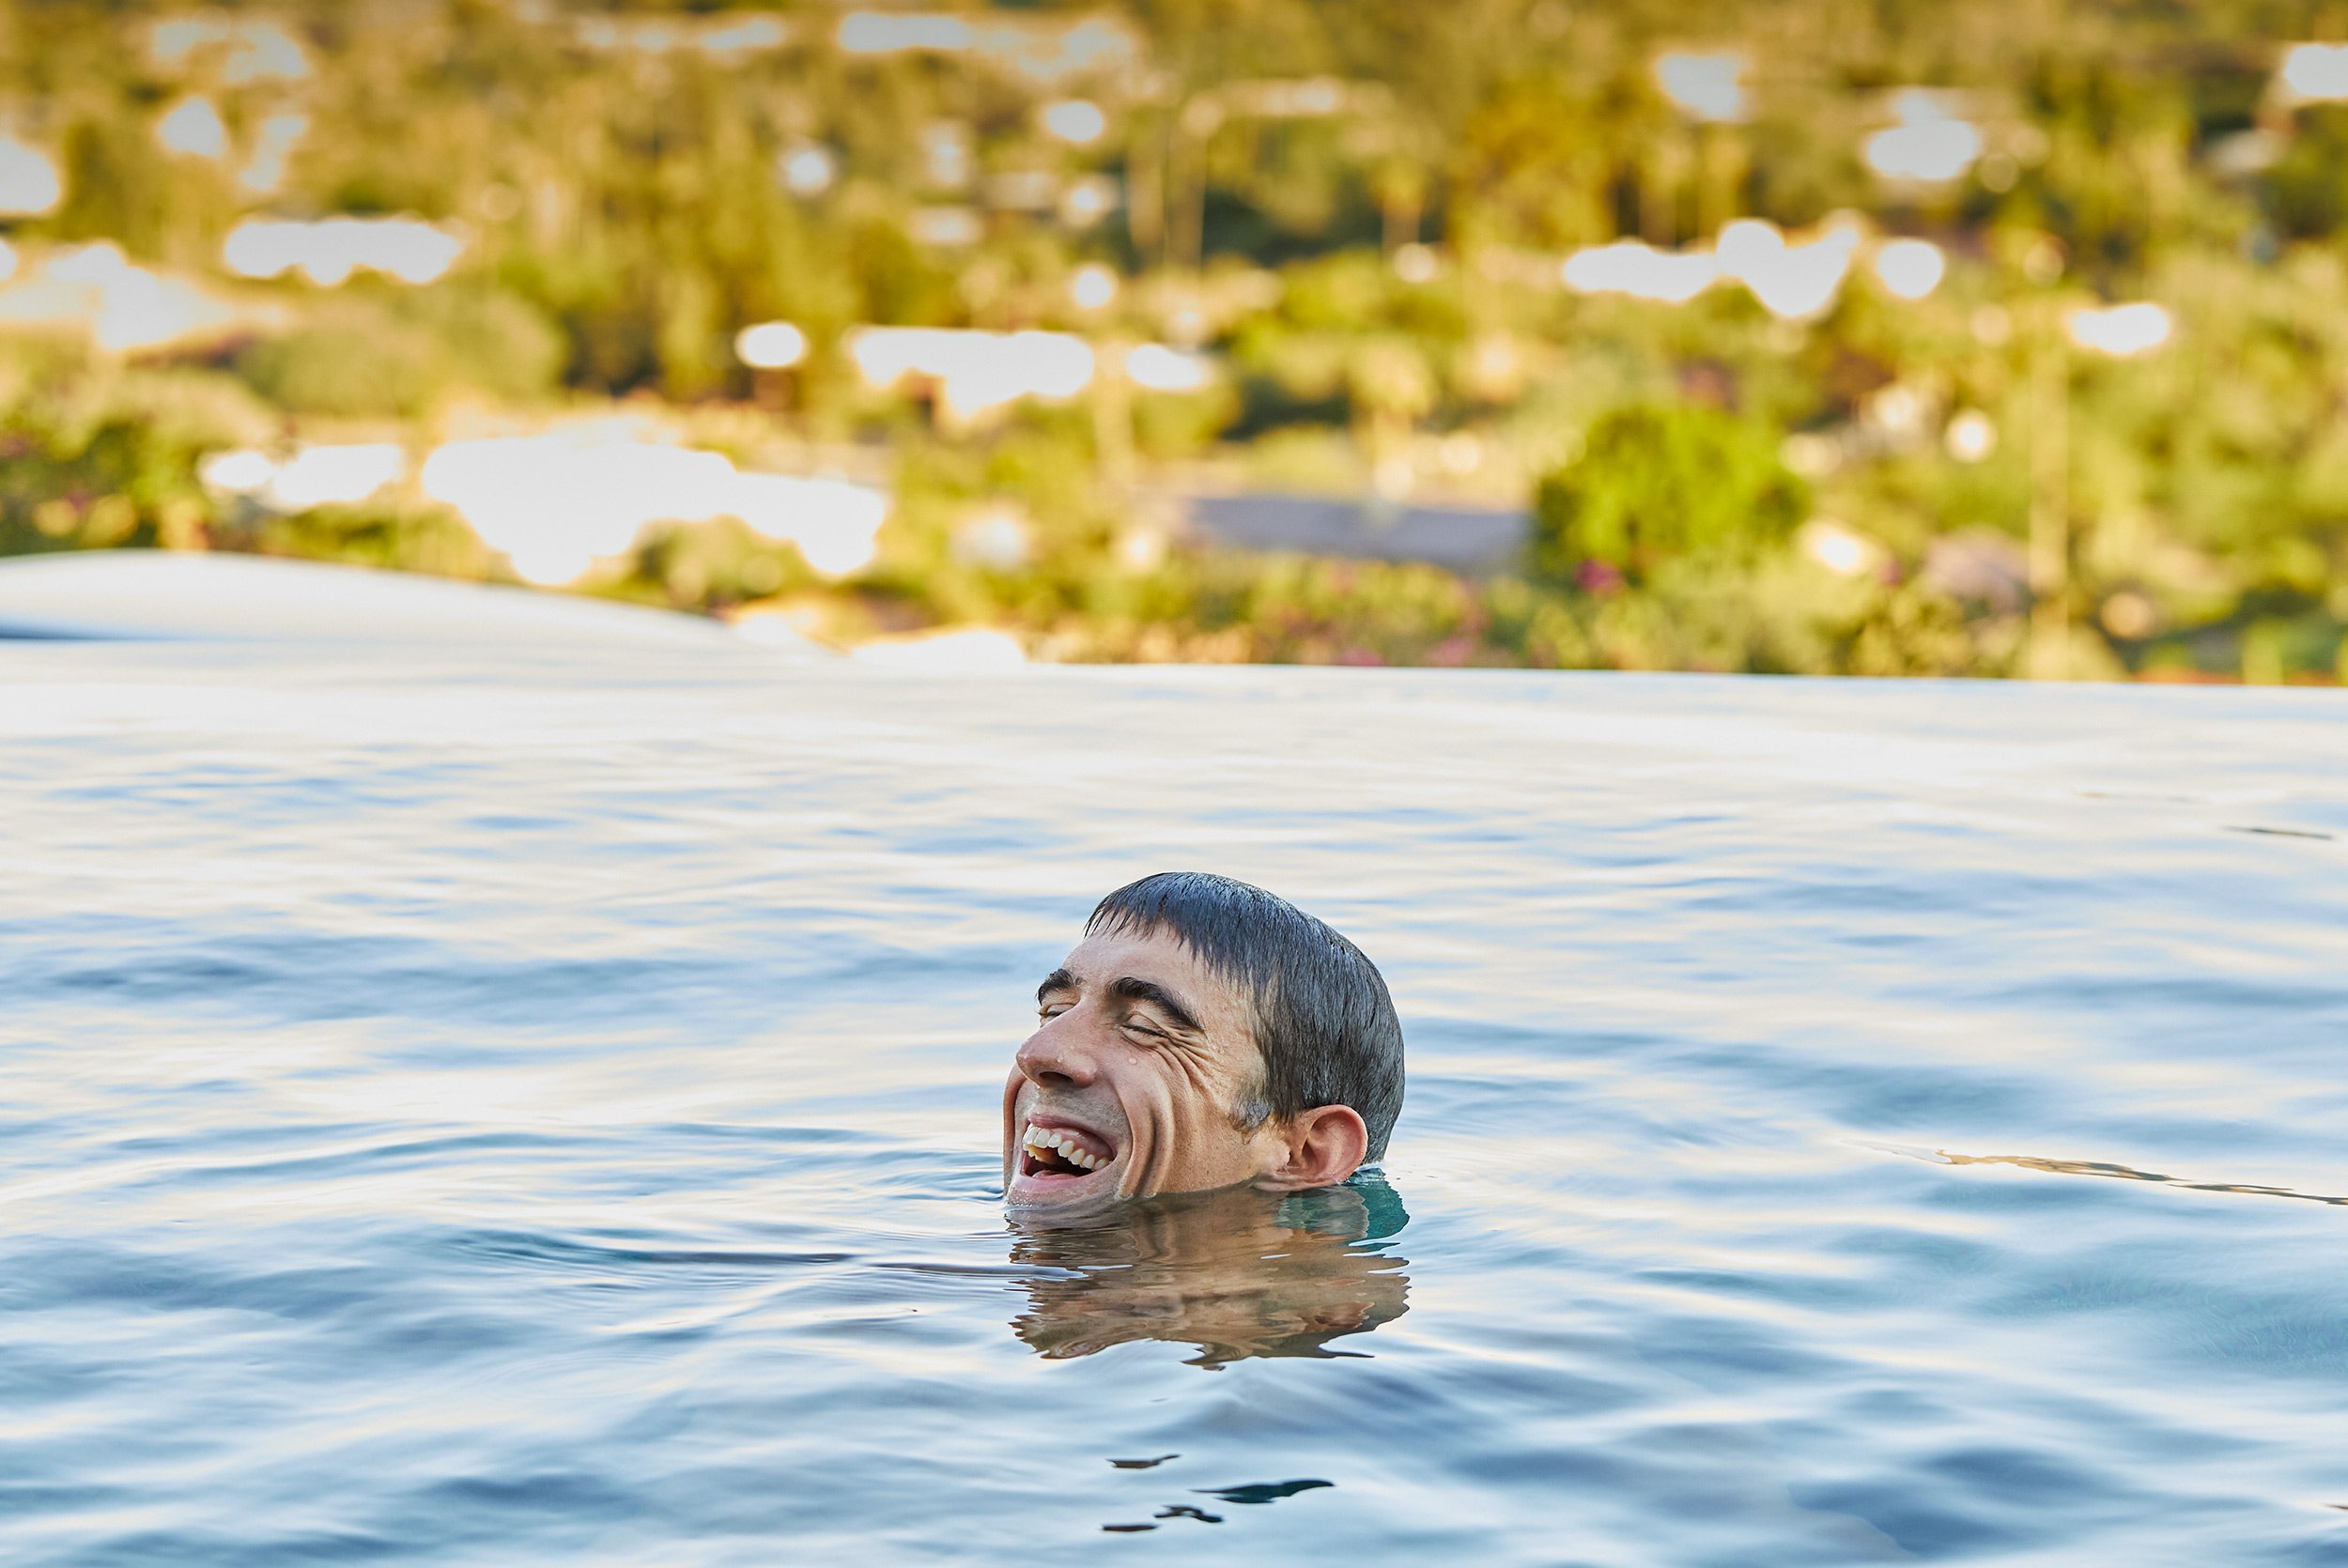 Photograph of Michael Phelps in a pool. 